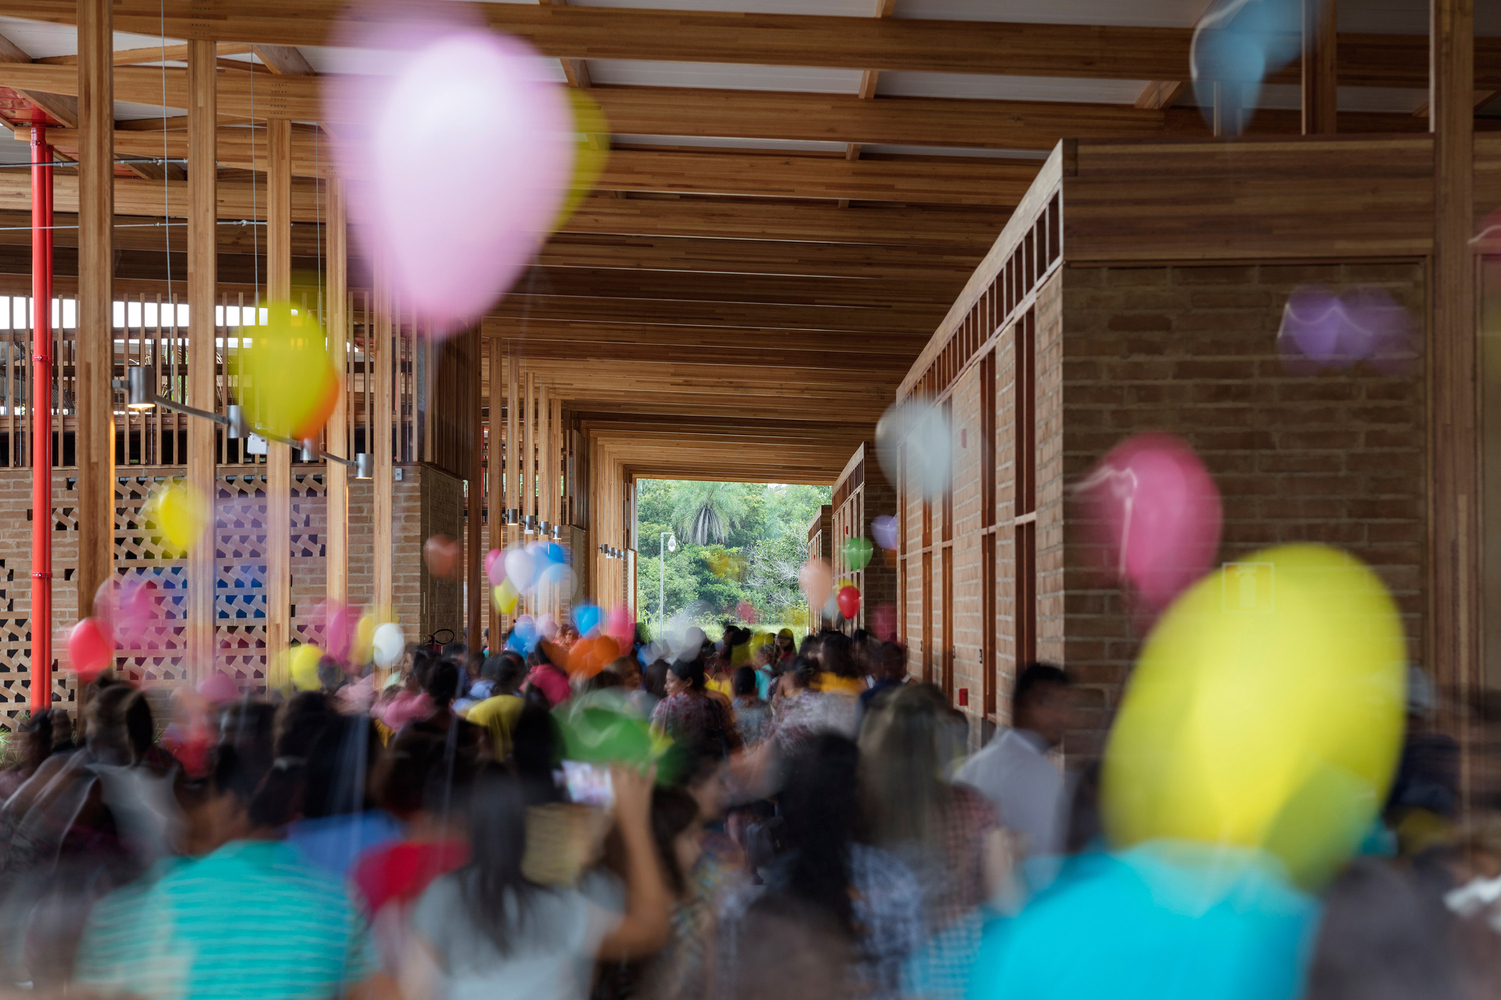 A corridor packed will kids and balloons inside the Children's Village School. 